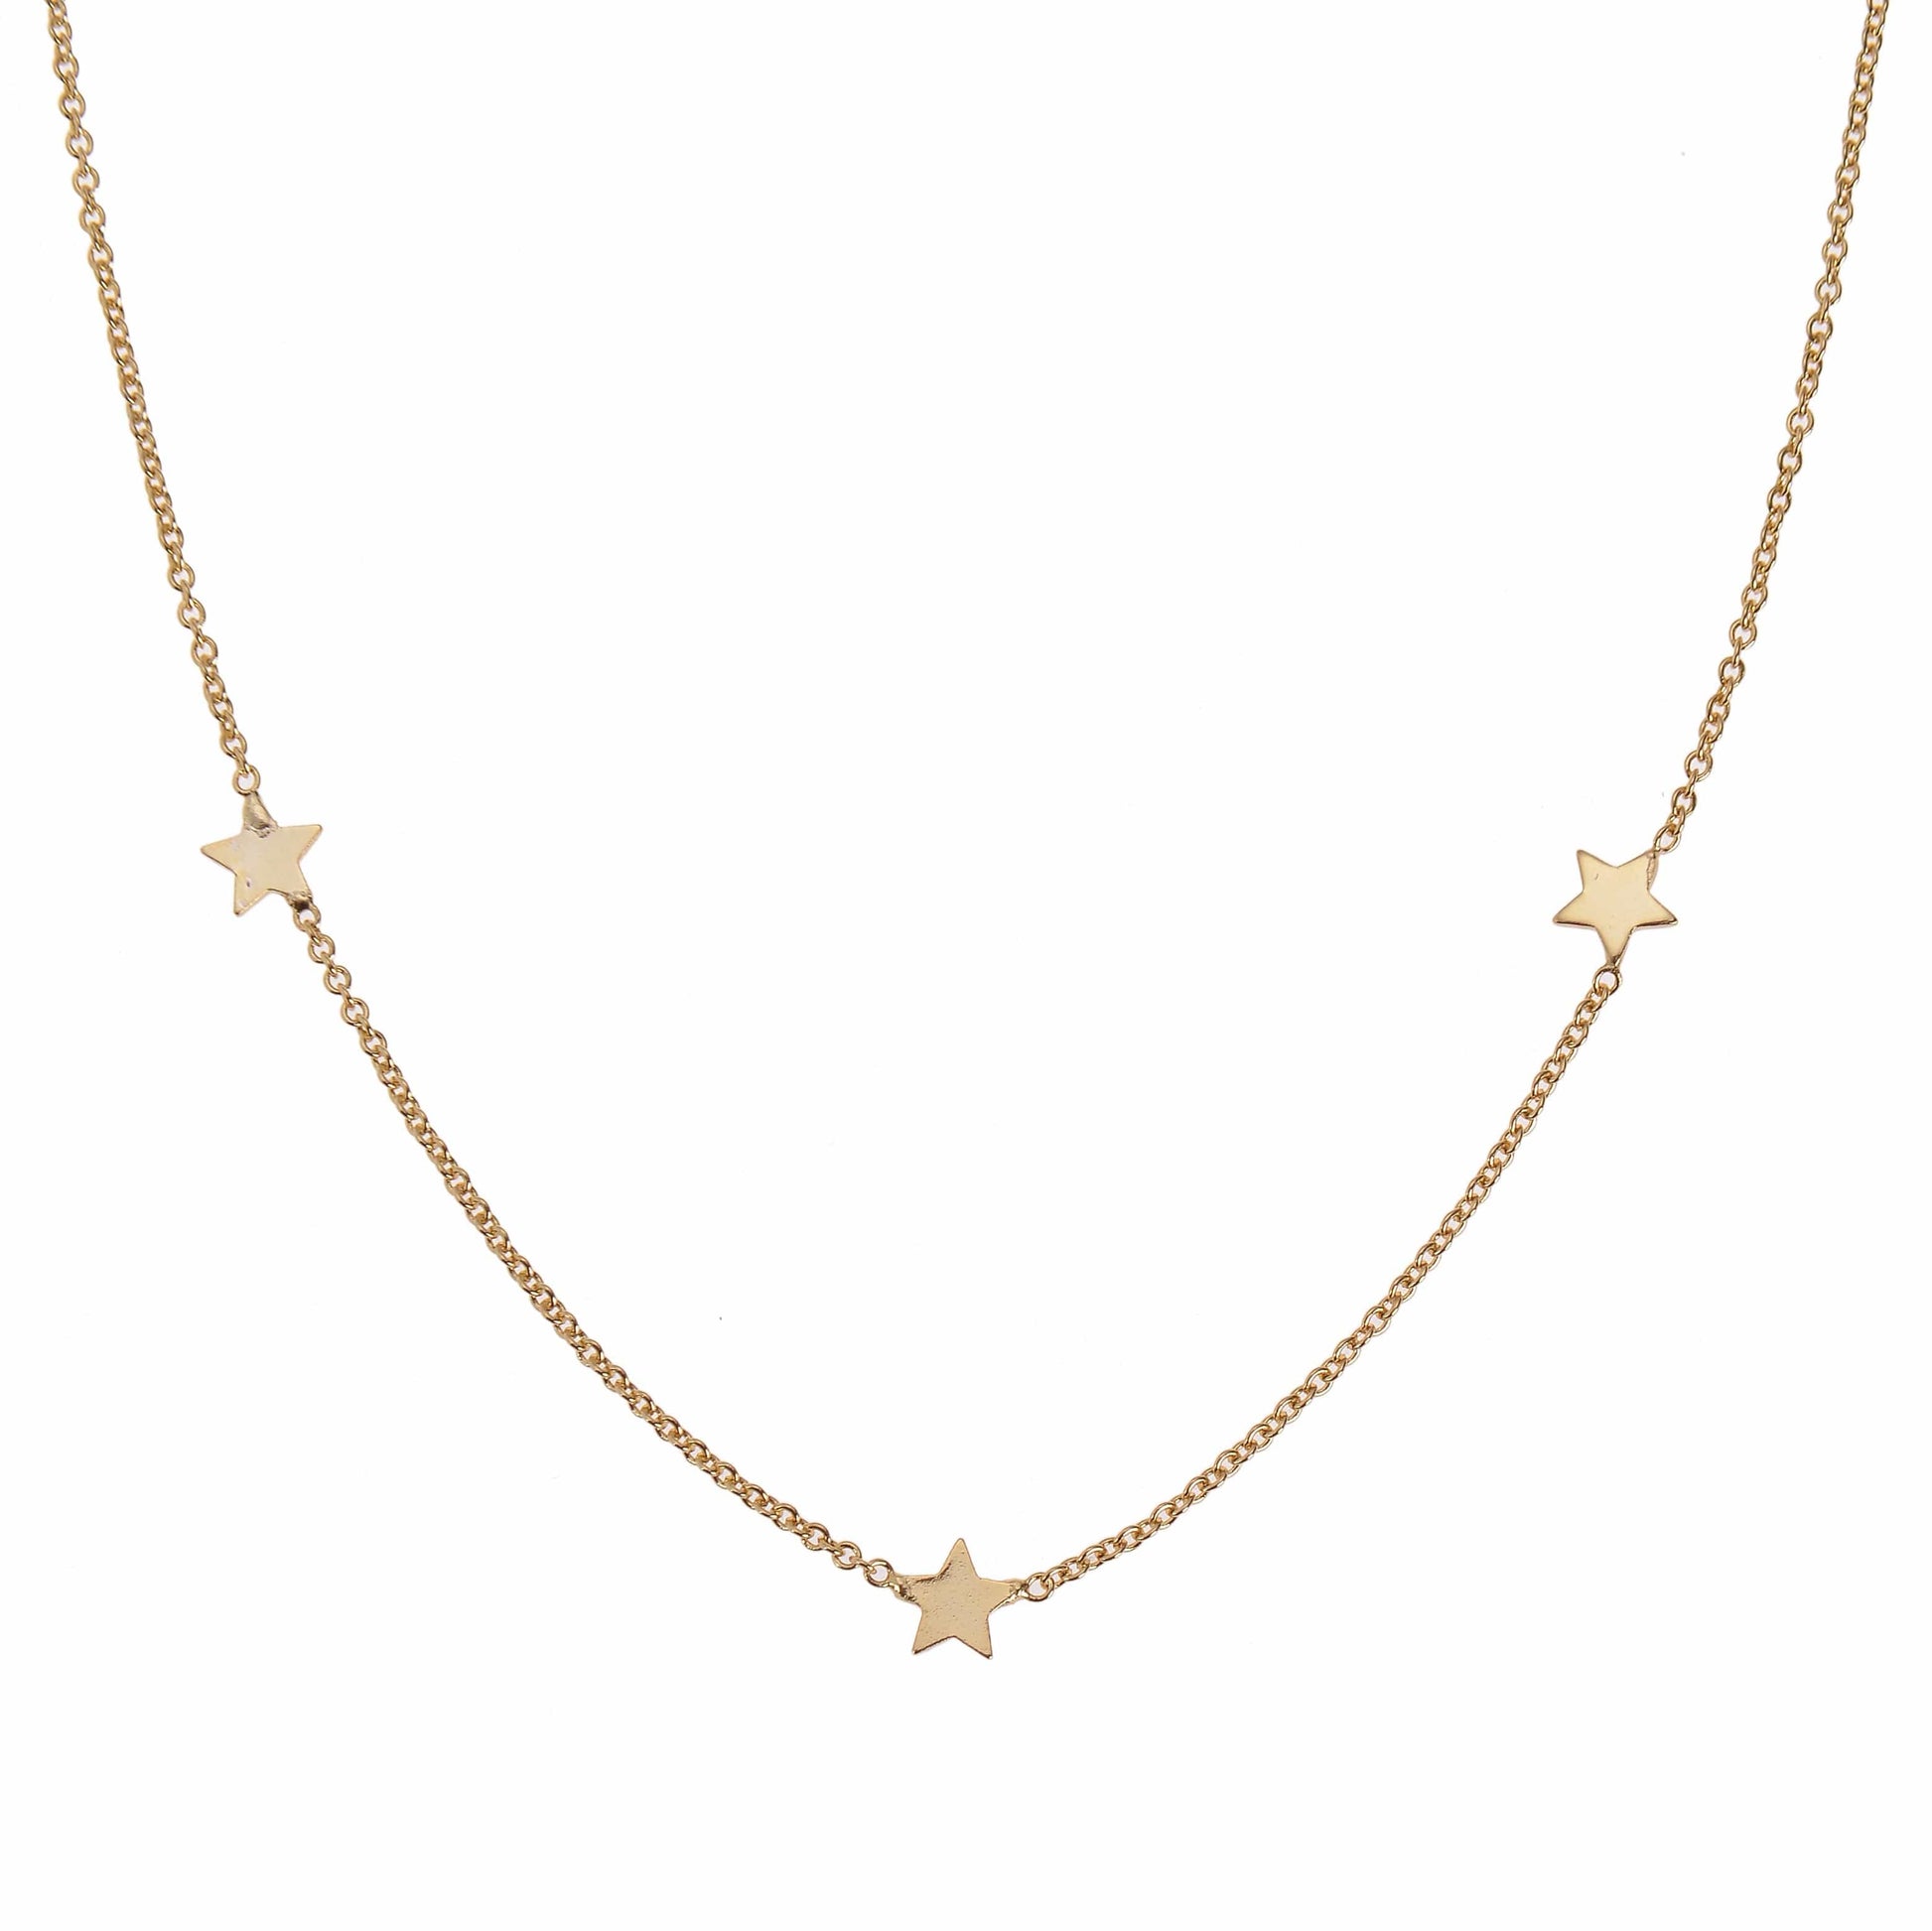 Star Charm Necklace in gold